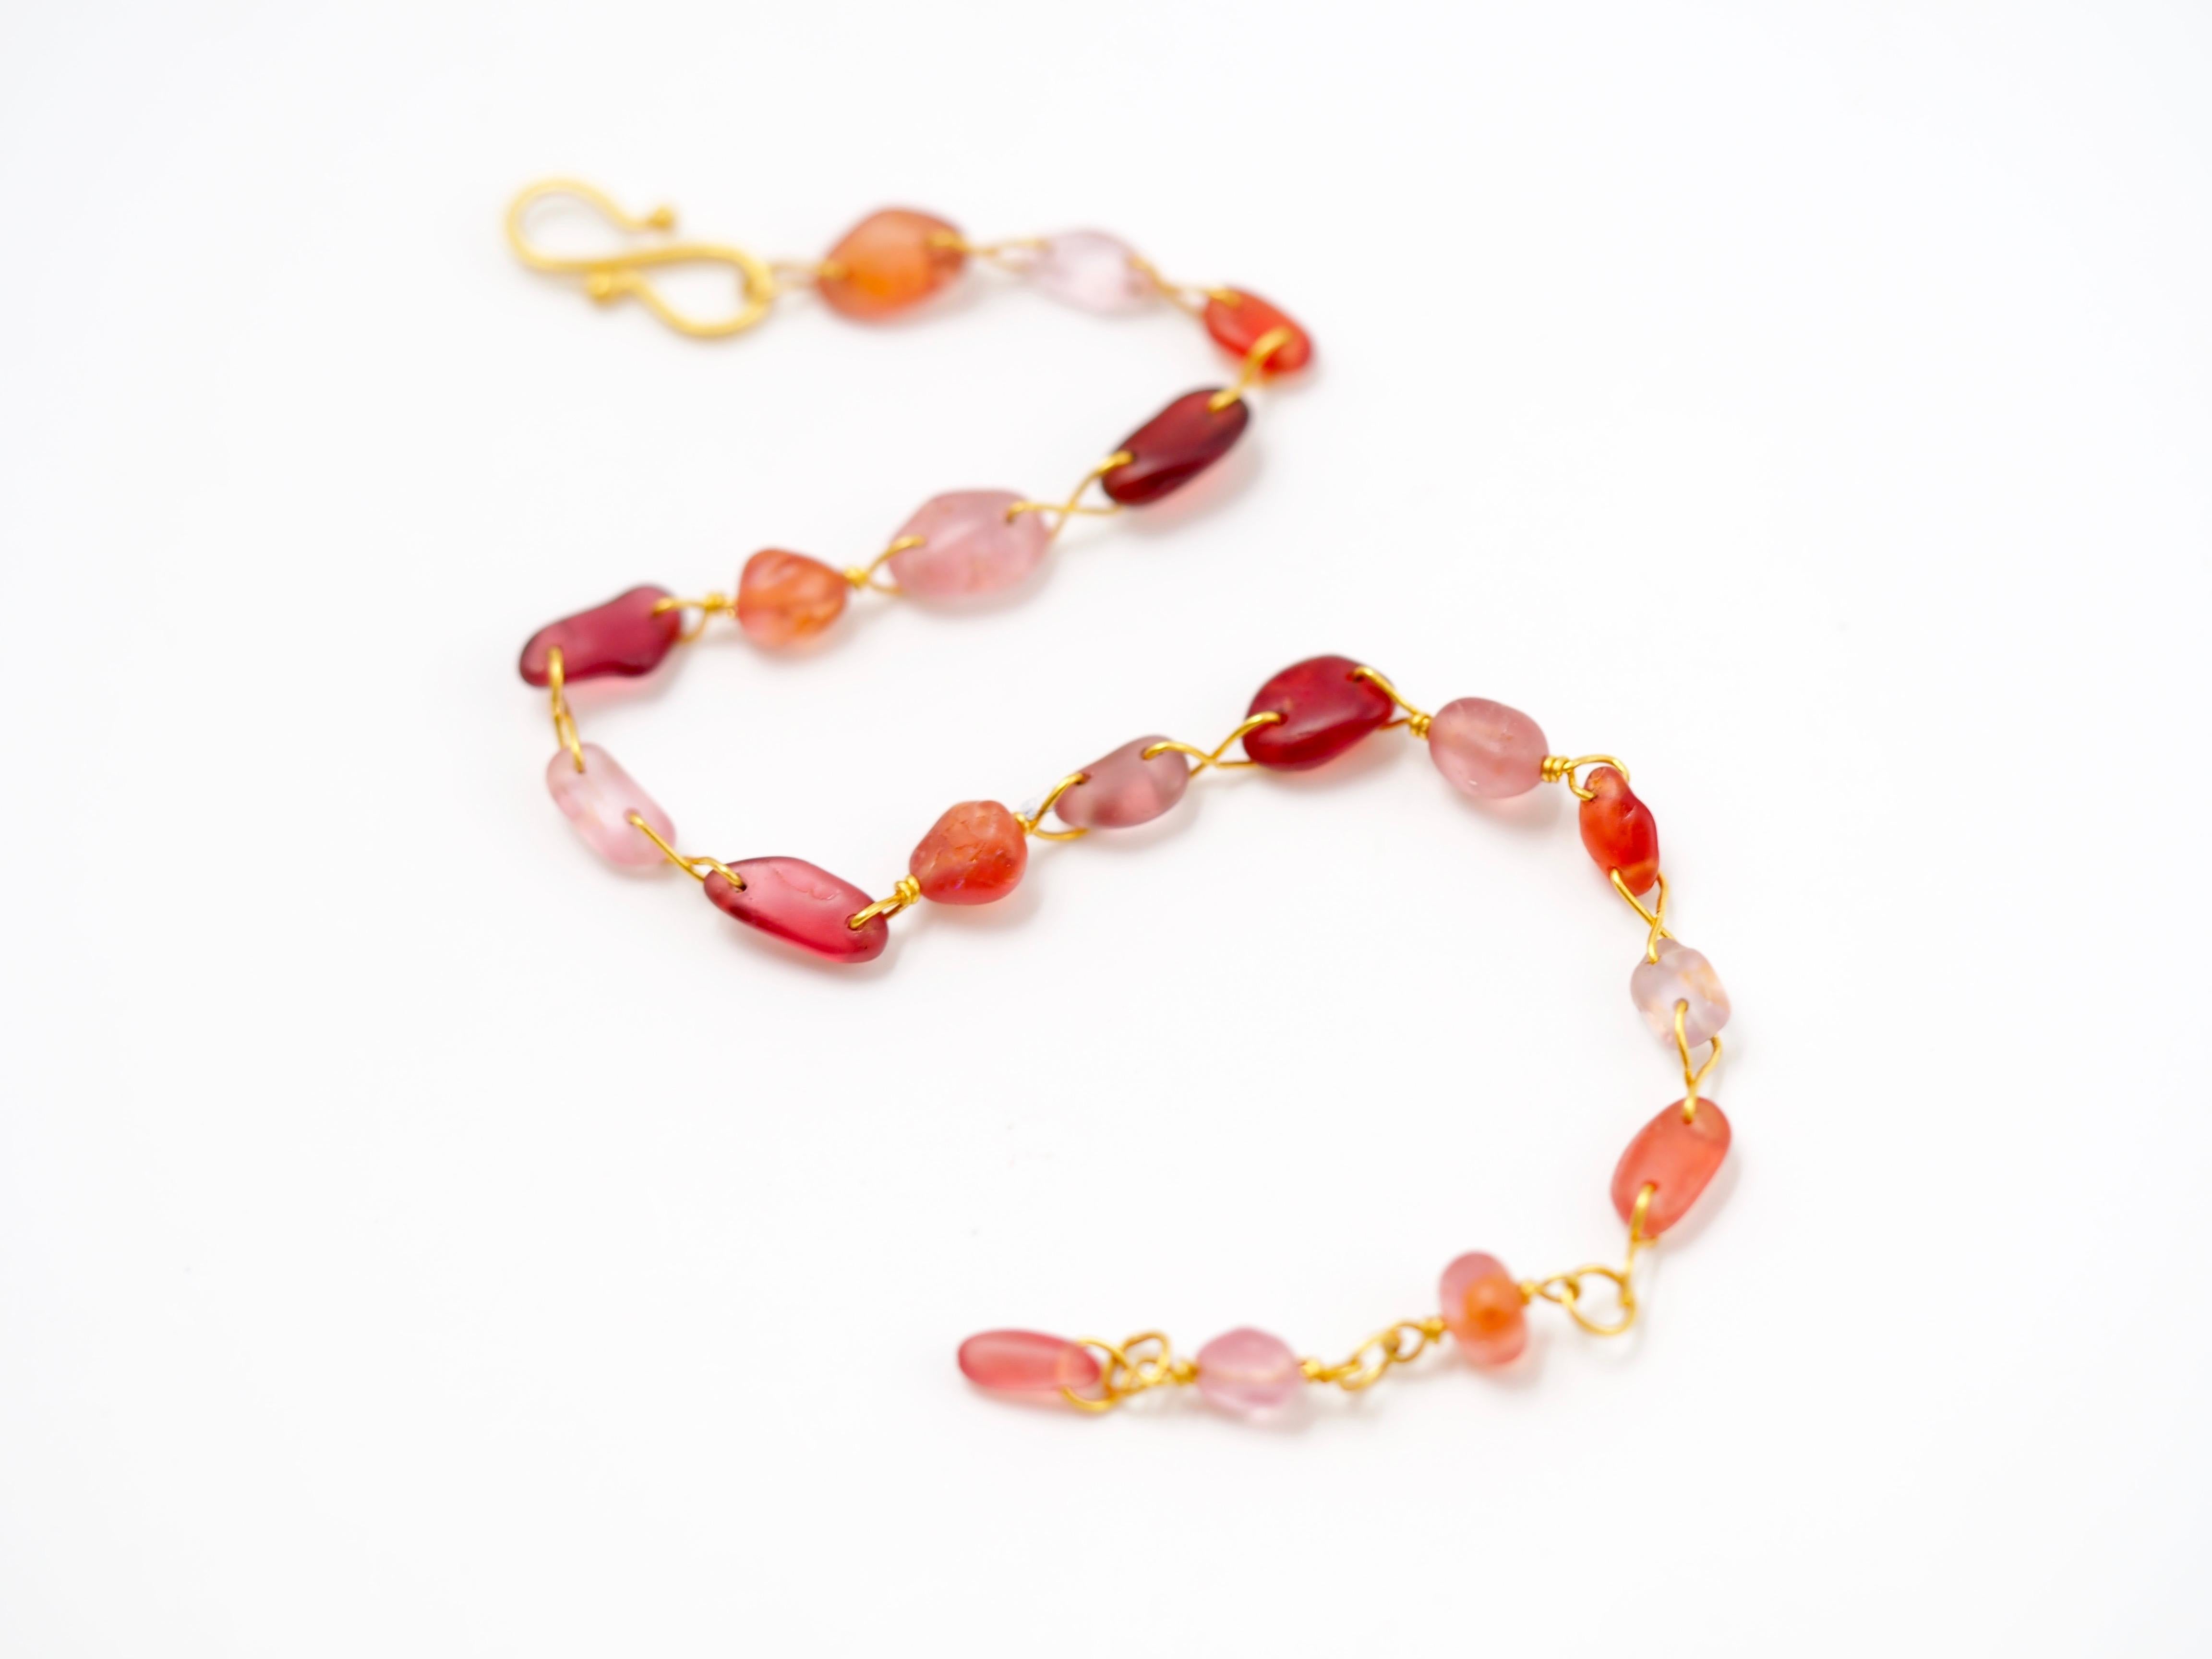 The beads of this bracelet by Scrives are made from natural polished spinels. They all show different shapes and colours in the same tone of orange and red. 
These stones have been found this way in Myanmar rivers. They have been naturally polished